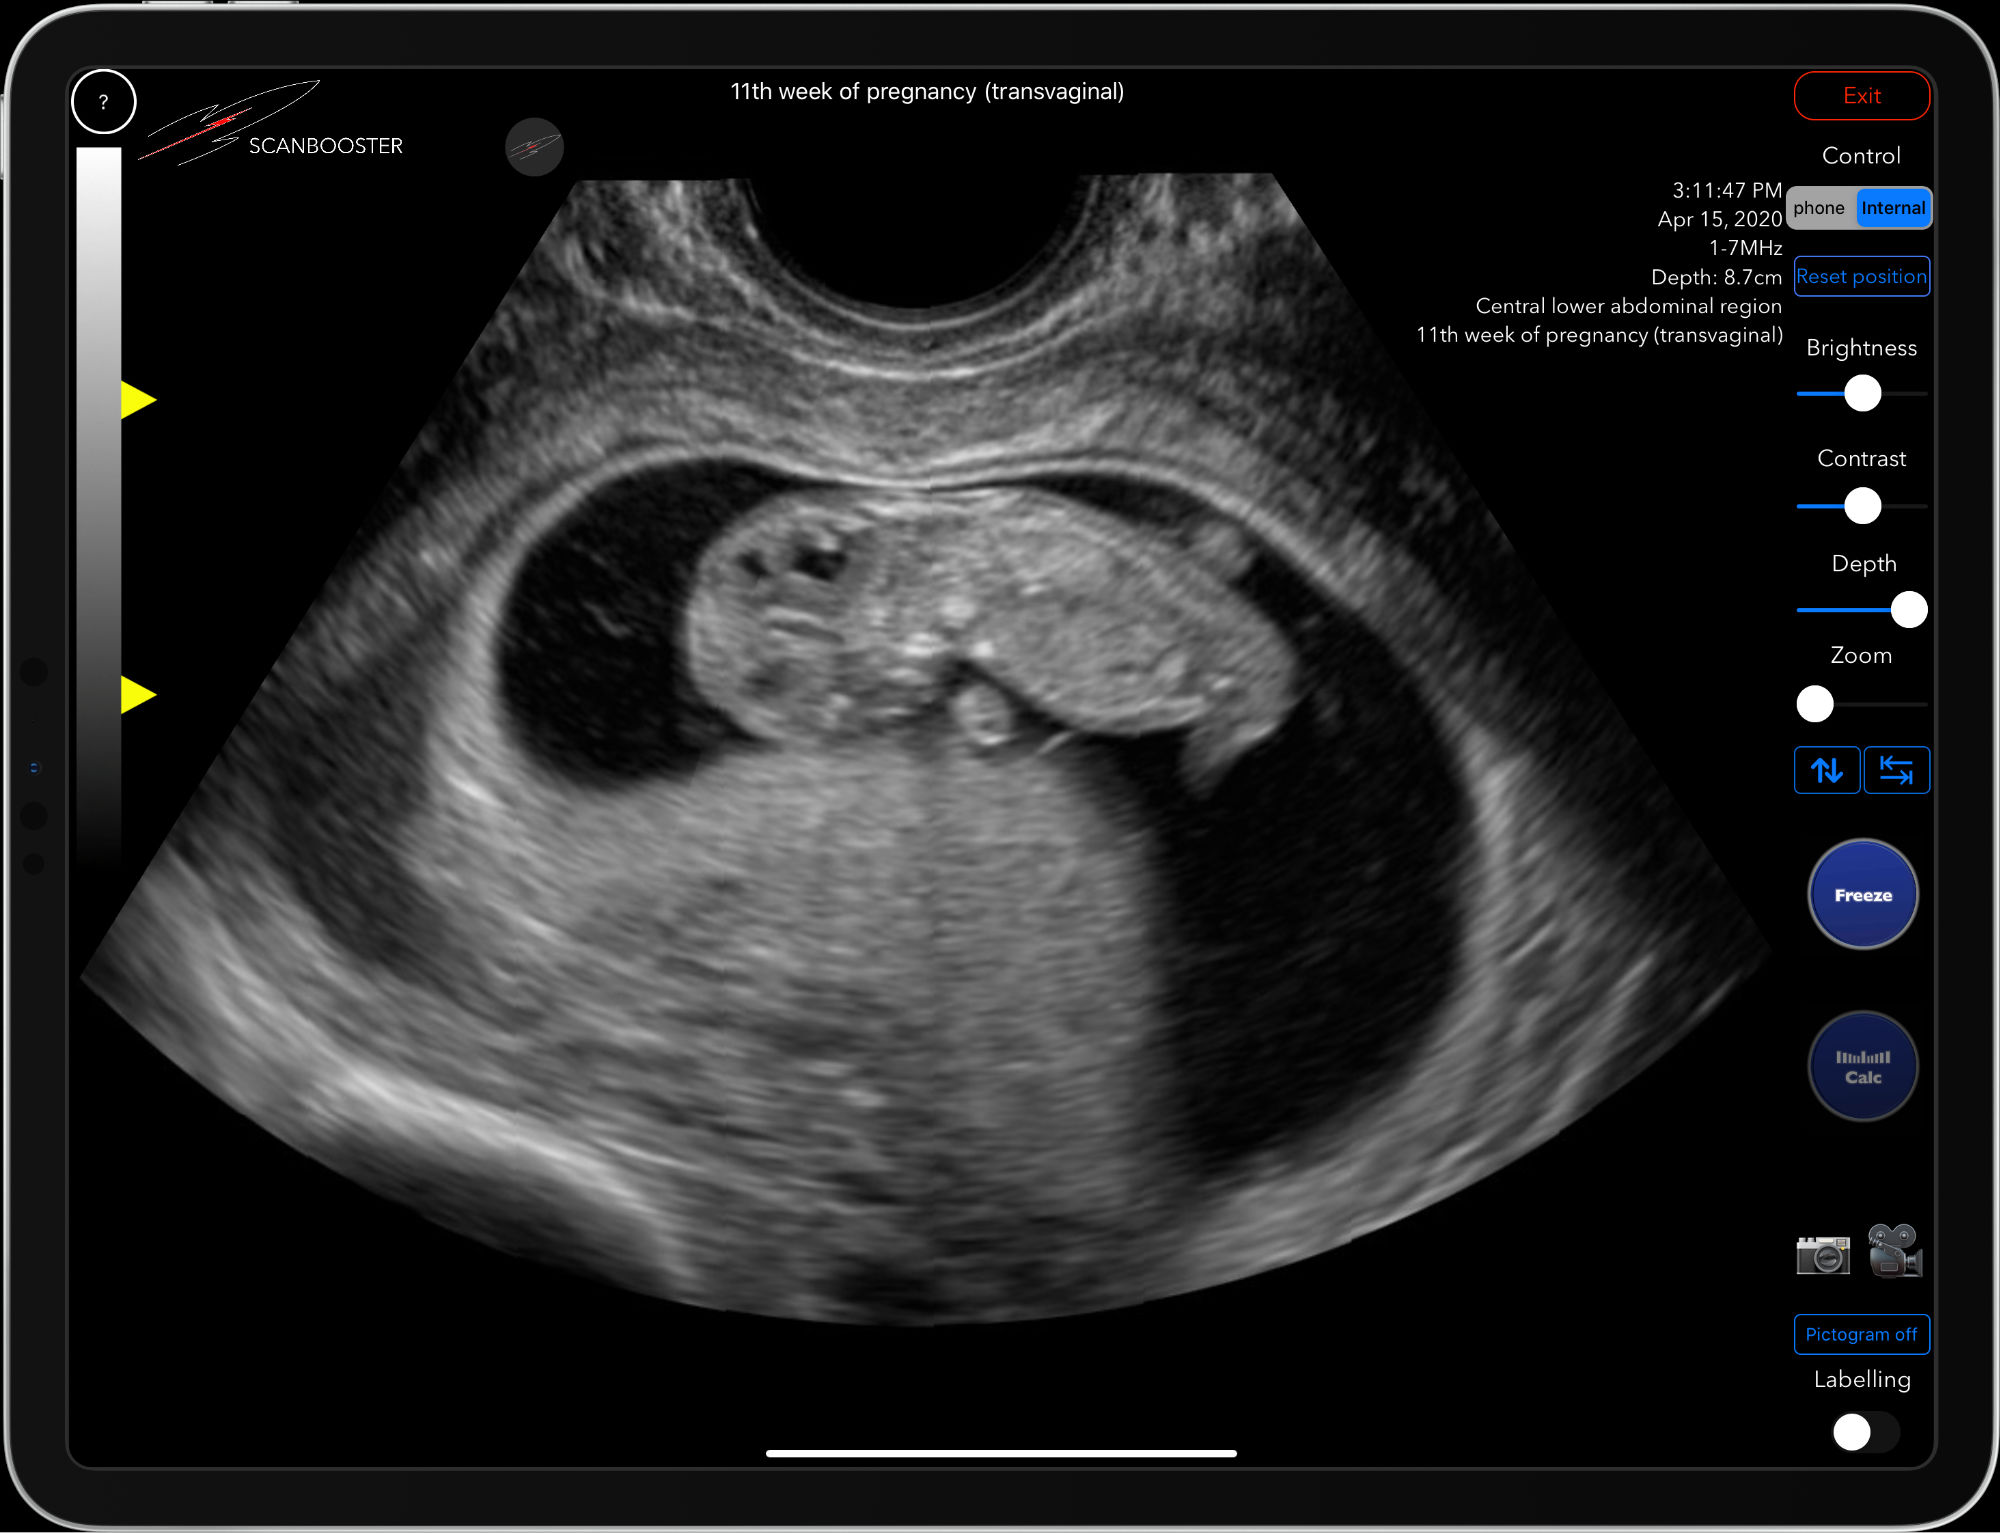 Scanbooster intravaginal transvaginal intracavity ultrasound probe simulation 11th week of pregnancy sonography in gynecology